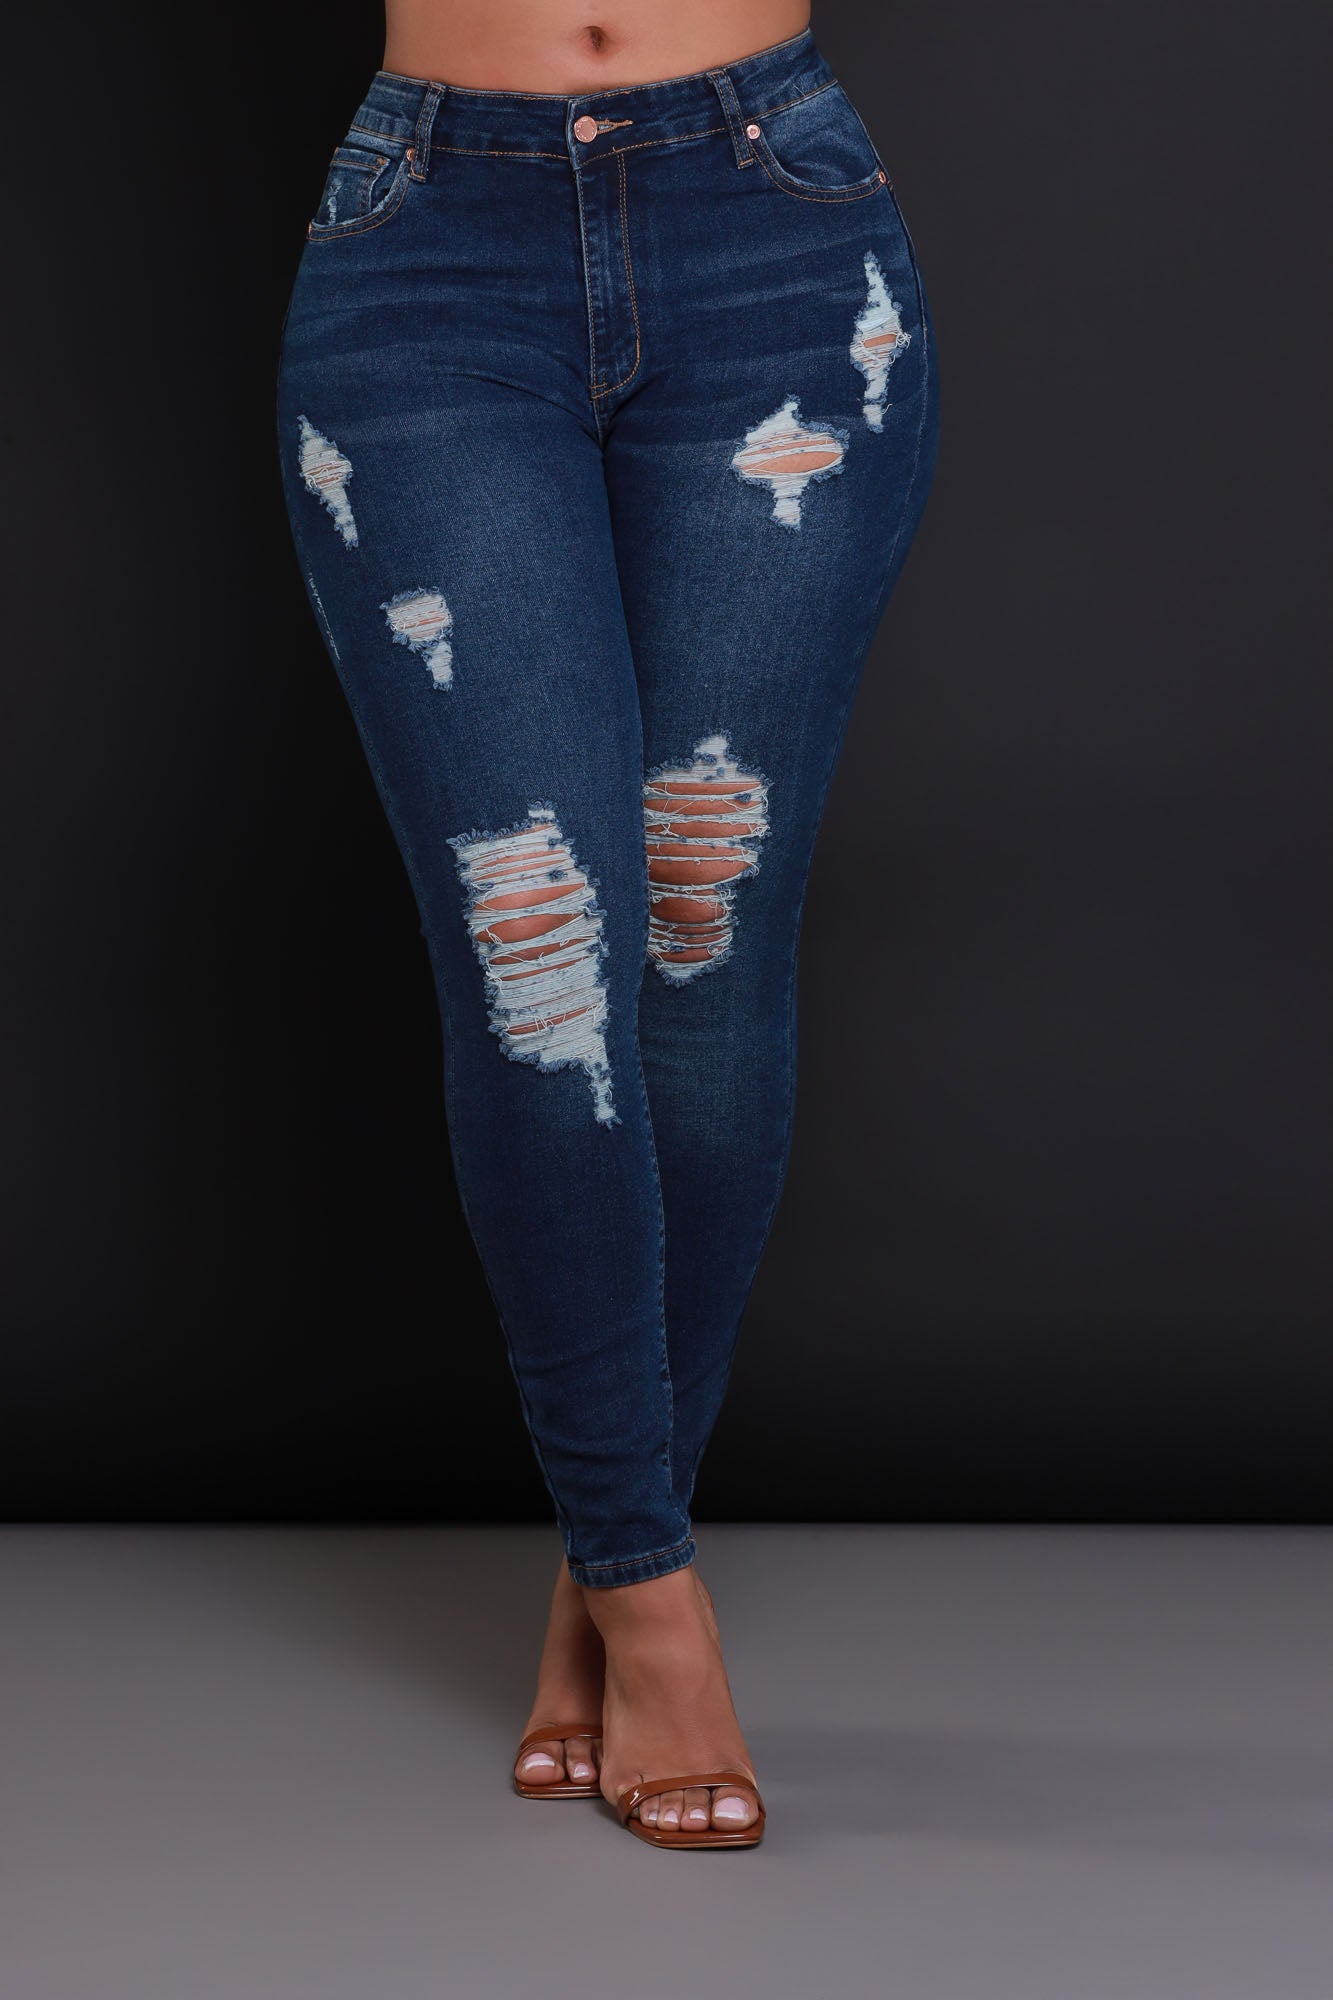 Heads Or Tails Hourglass Distressed Stretchy Jeans - Dark Wash - Swank A Posh